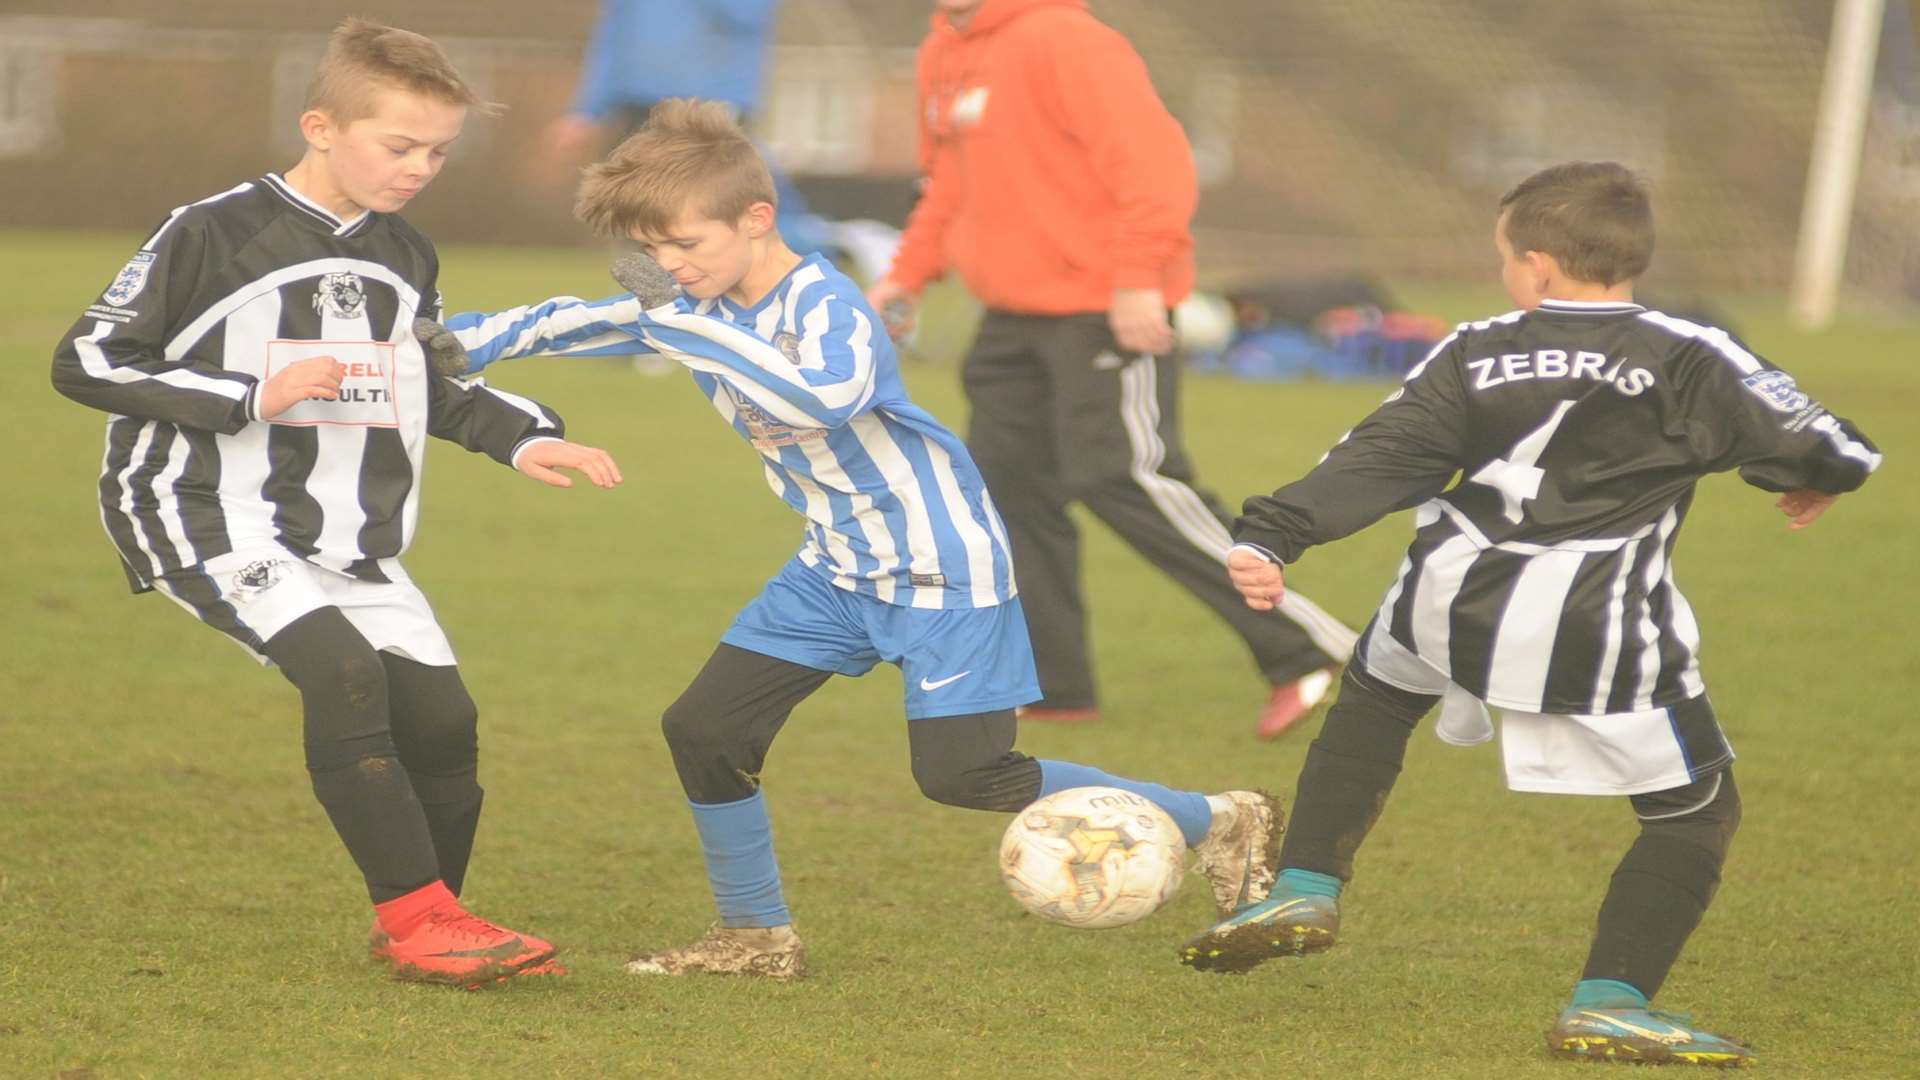 Two against one as Milton & Fulston United combine to thwart Chatham Riverside in Under-11 Division Pluto Picture: Steve Crispe